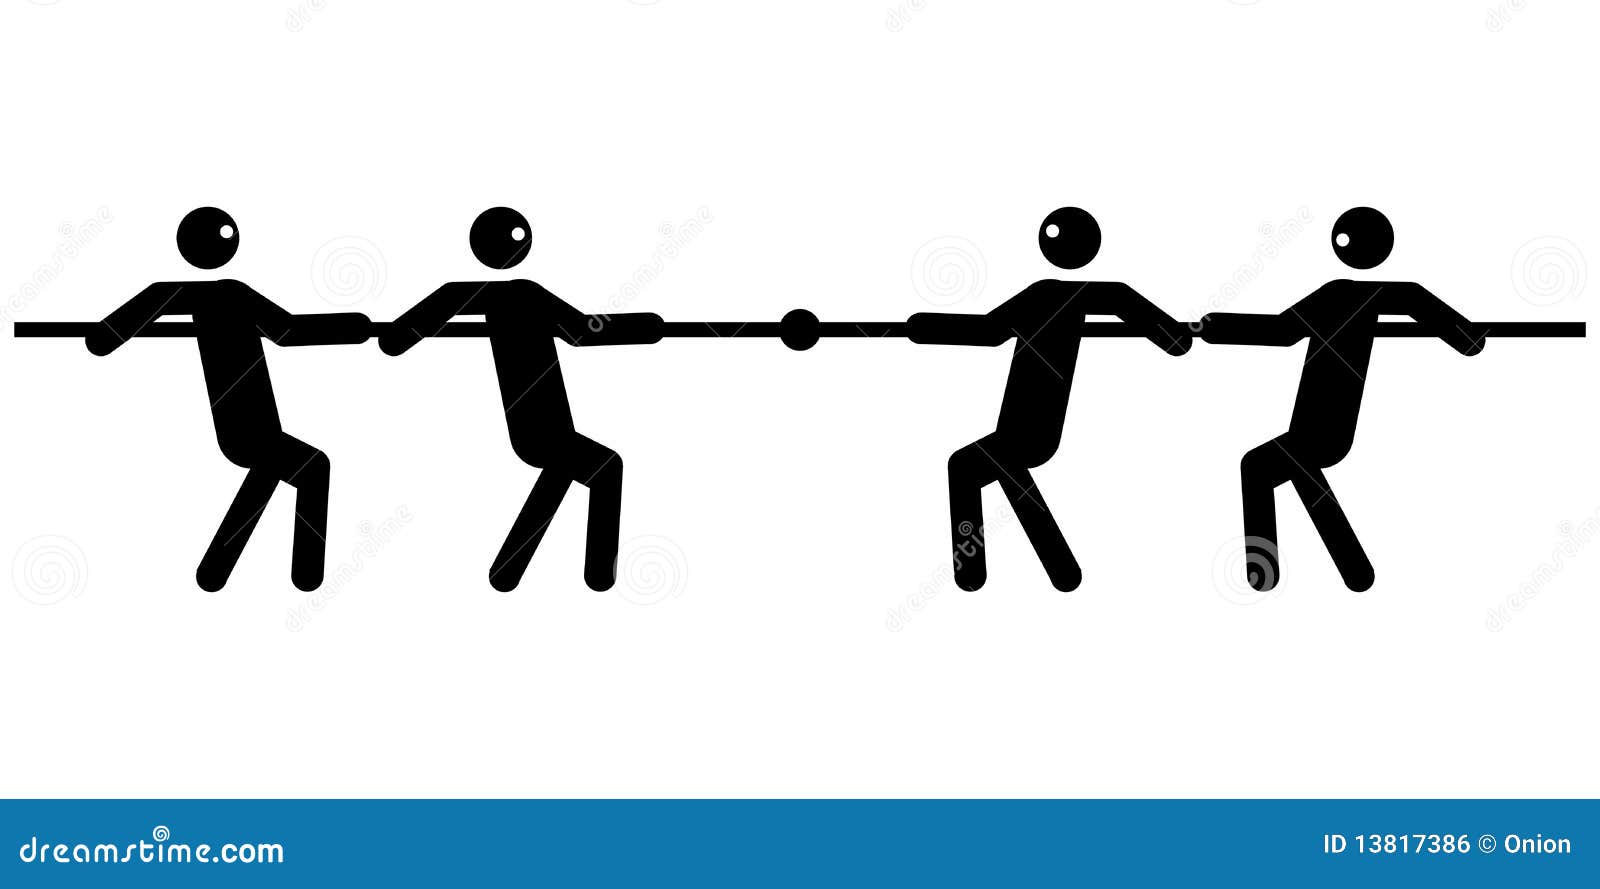 tug of war clipart images - photo #39